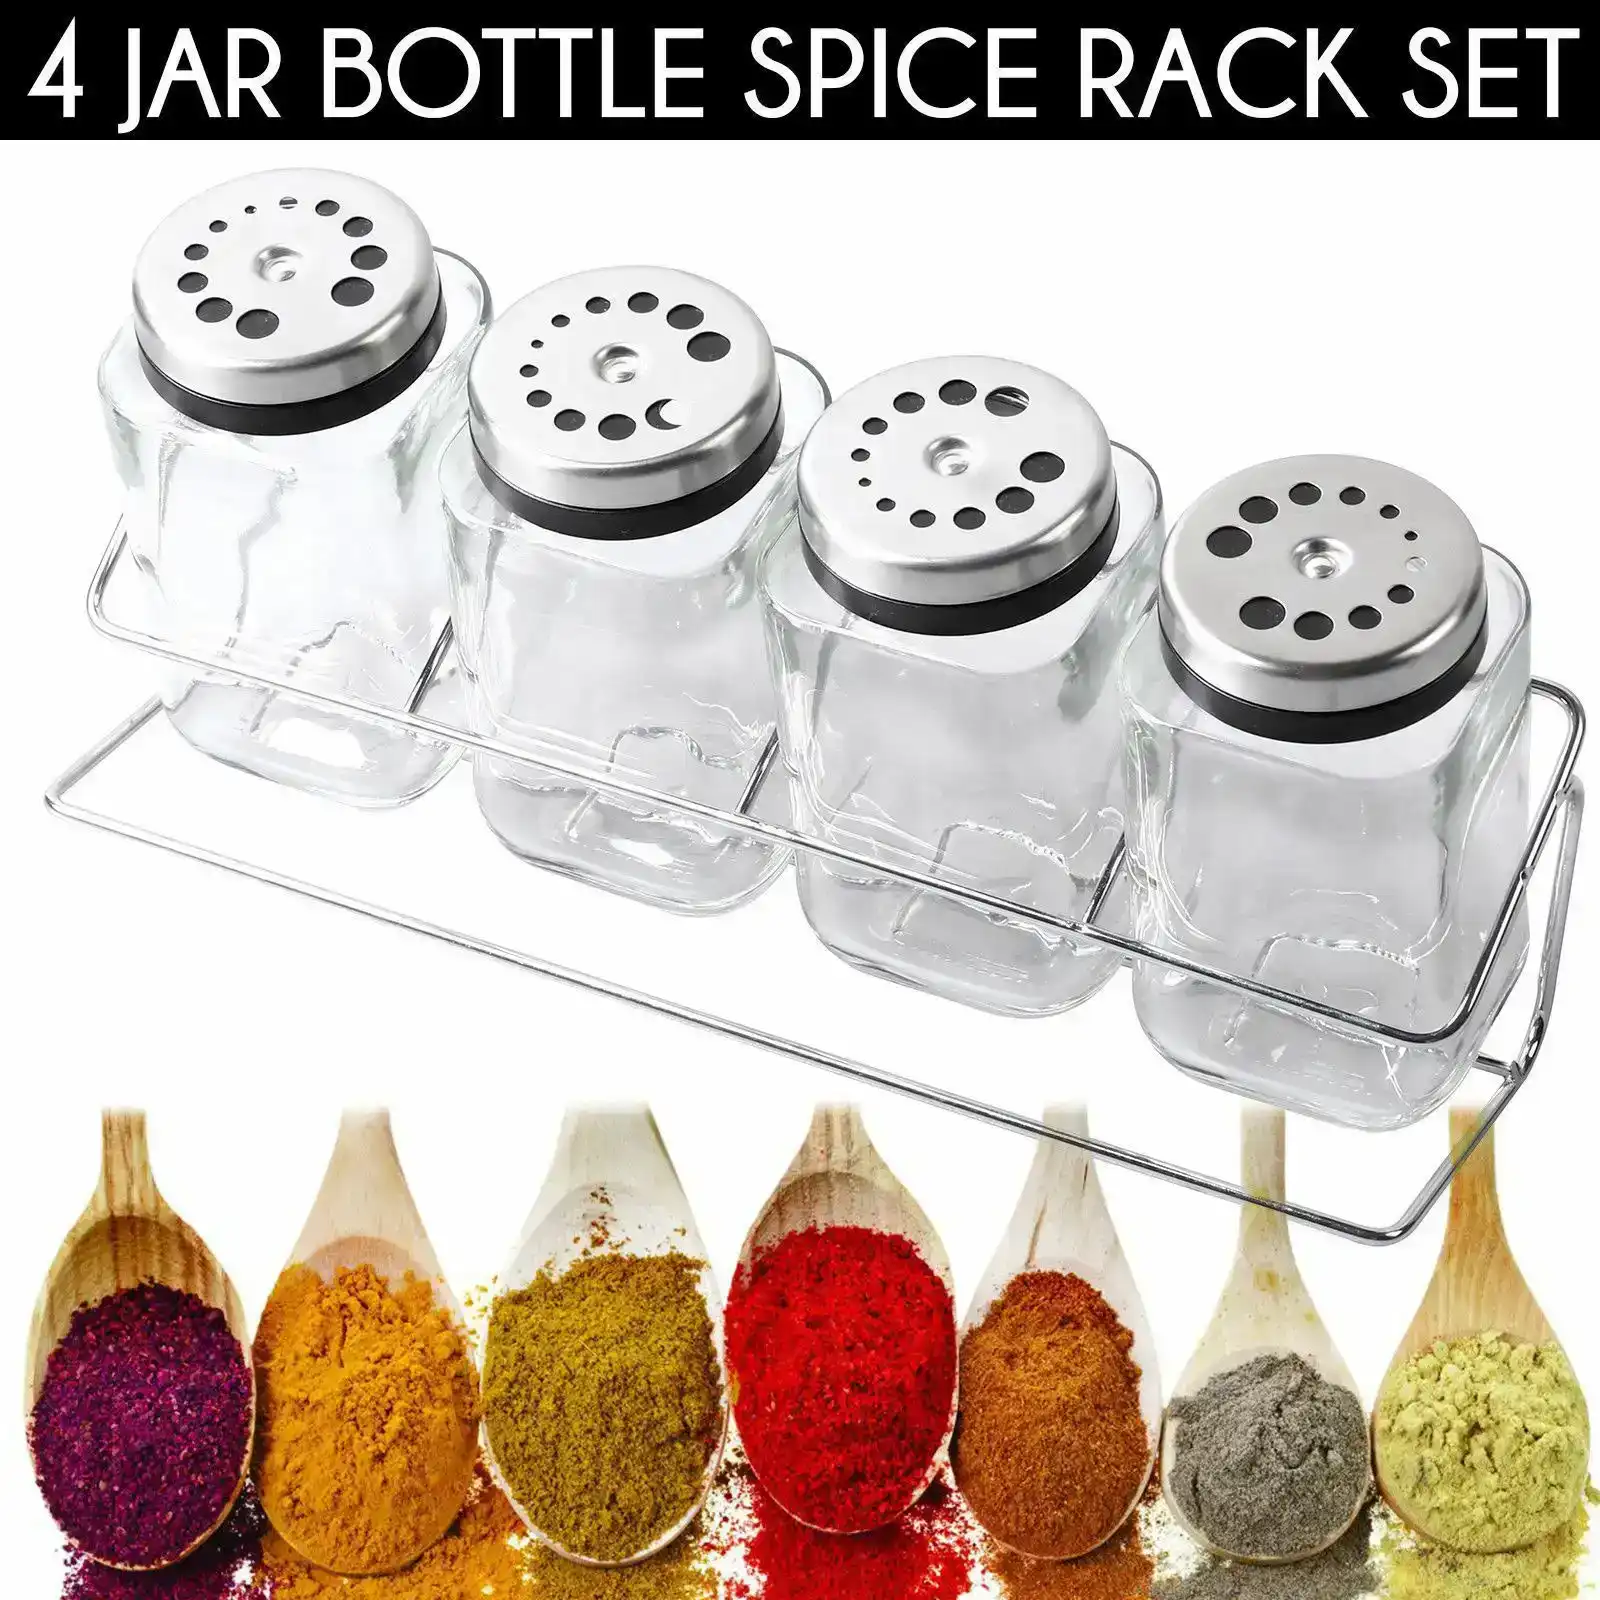 Gourmet Kitchen 4 Glass Jar Spice Stainless Steel Rack Set - Clear